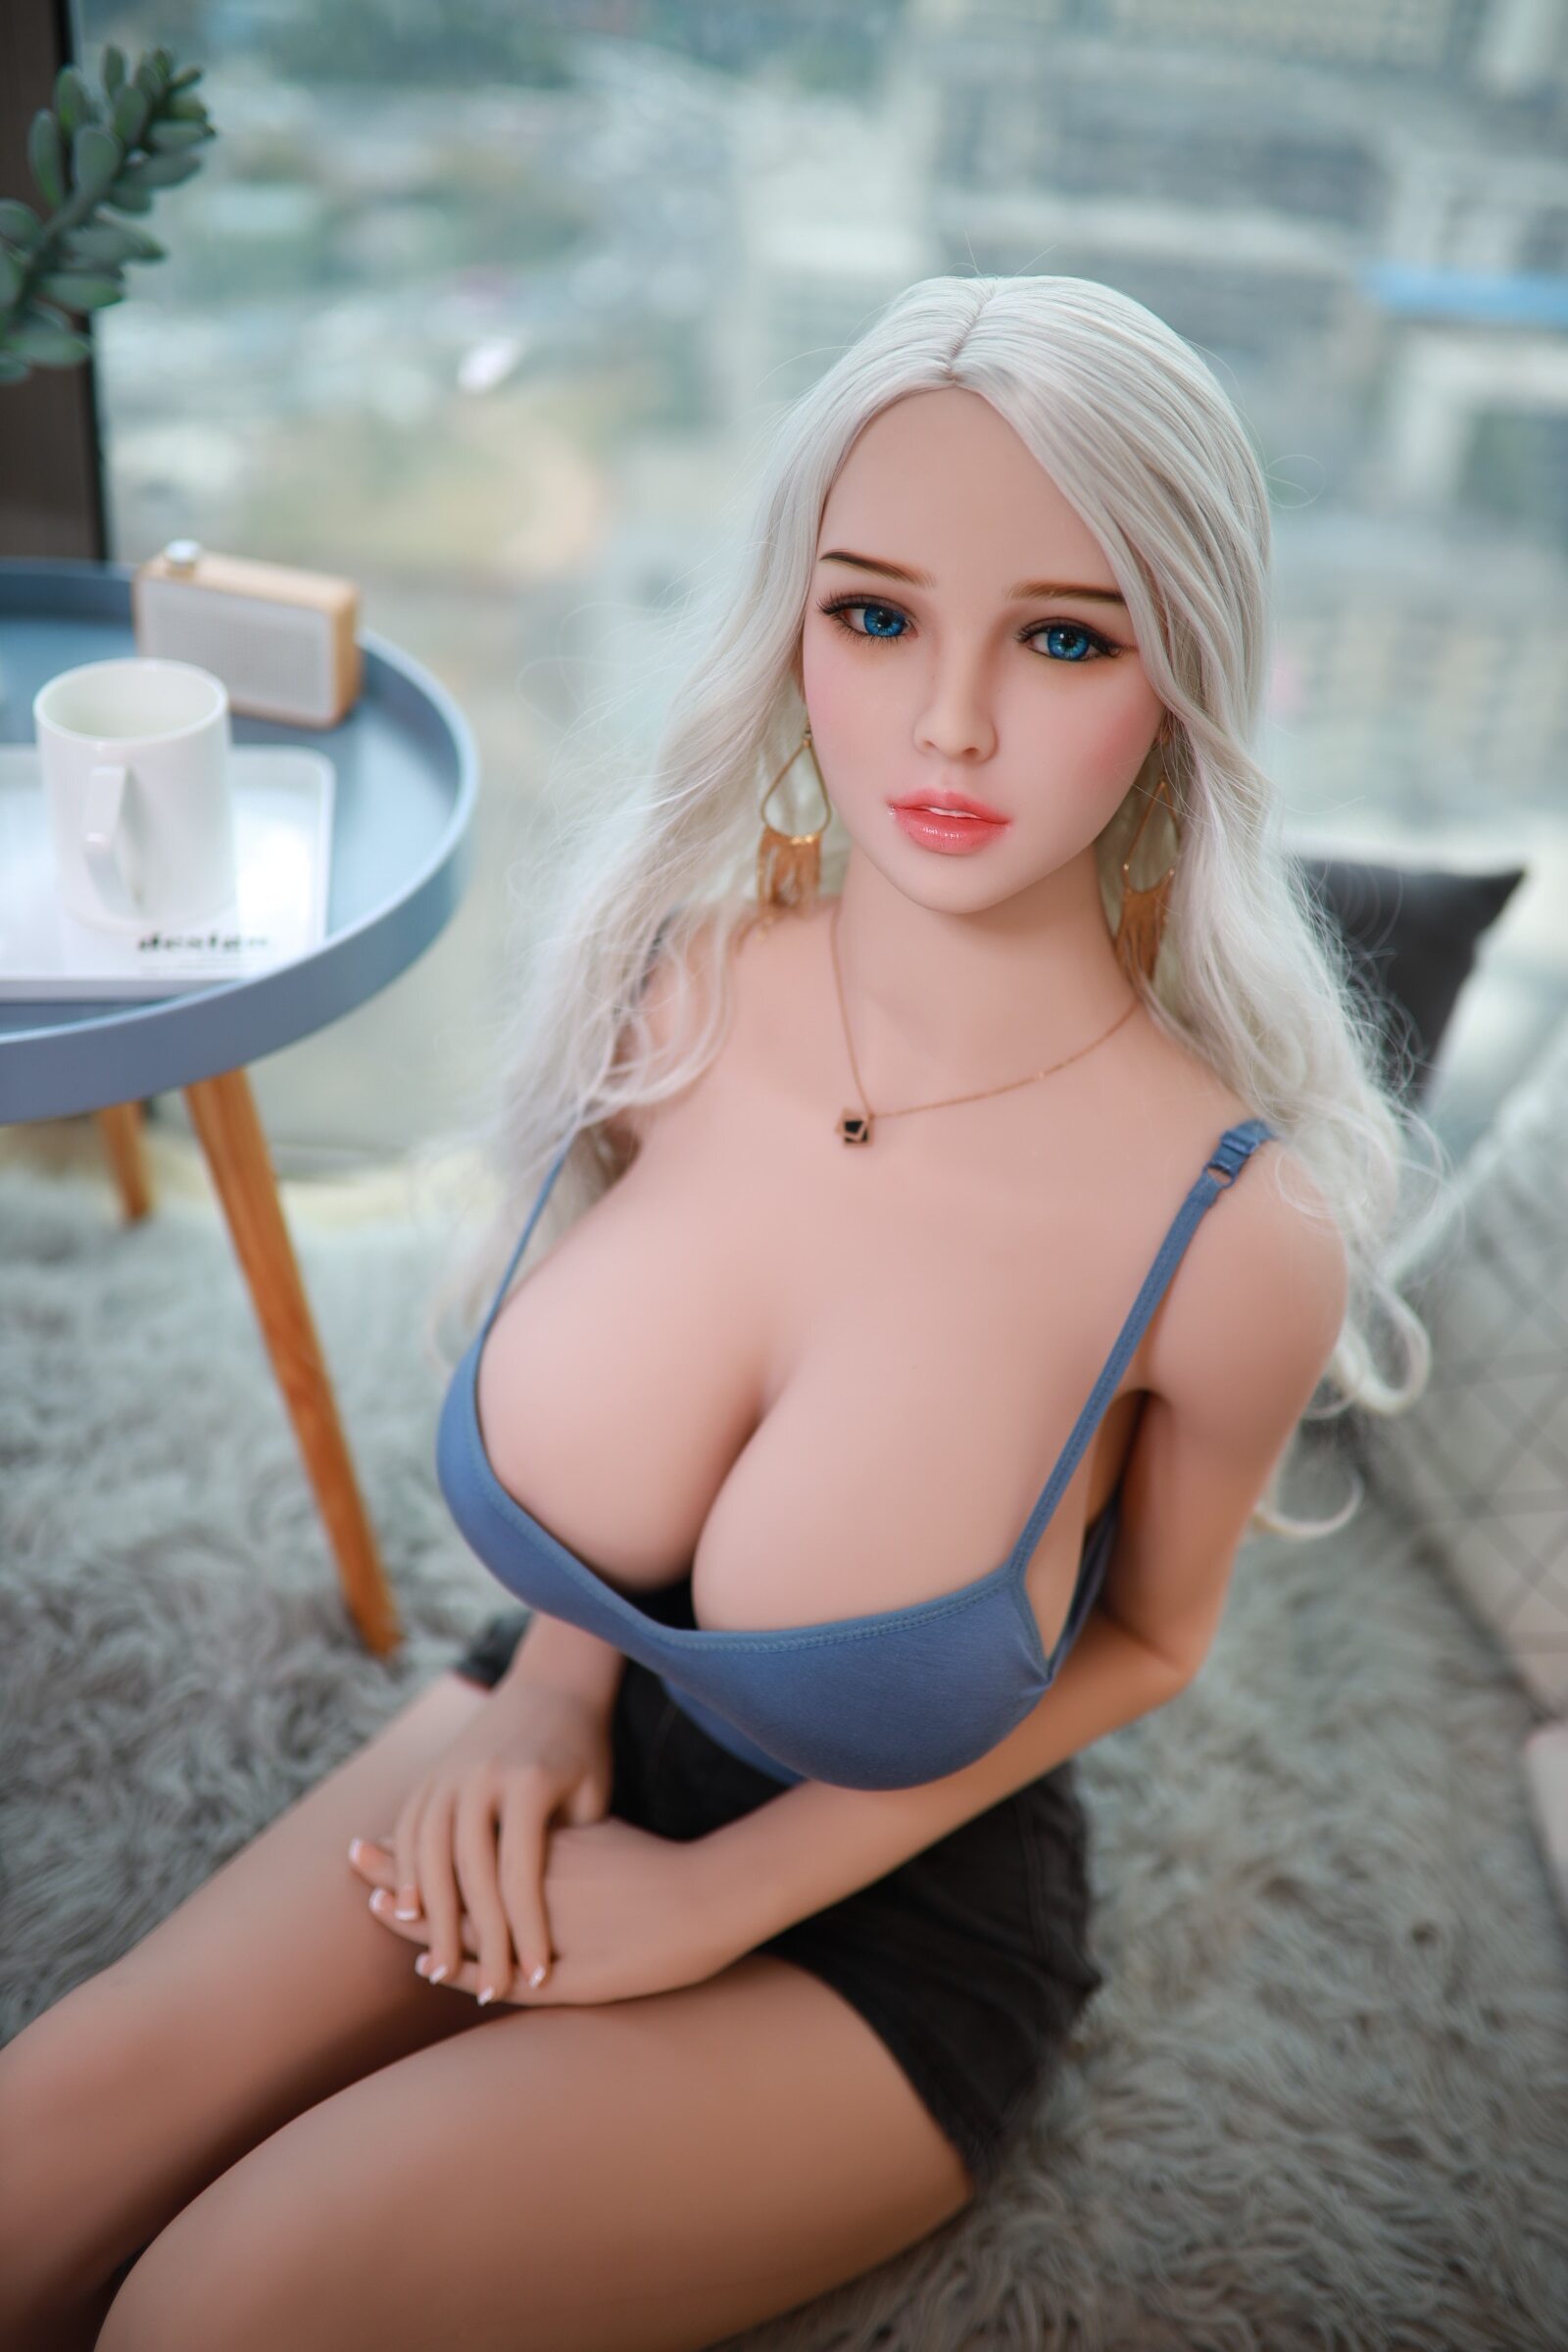 TPE Adult Dolls Sexy Lady Real Pussy Vagina Anus Lifelike Oral Sex Anime Love Dolls for Man Masturbator Love Dolls,Masturbator,Love Dolls,TPE Love Dolls,TPE Adult Love Dolls,TPE Adult Masturbator Love Dolls